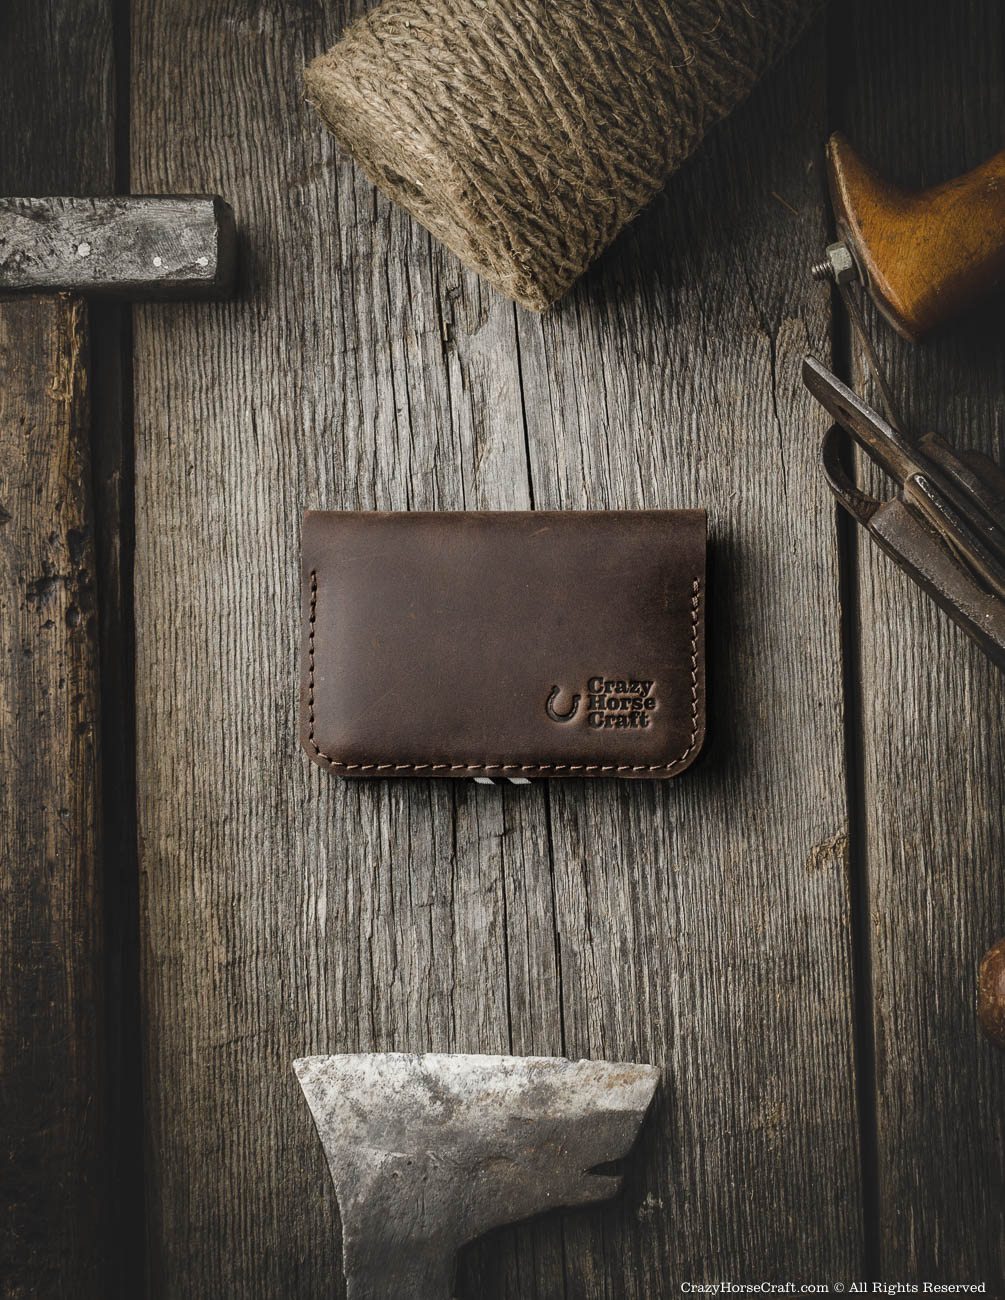 Leather Business & Credit Card Holder / Wallet | Wood Brown